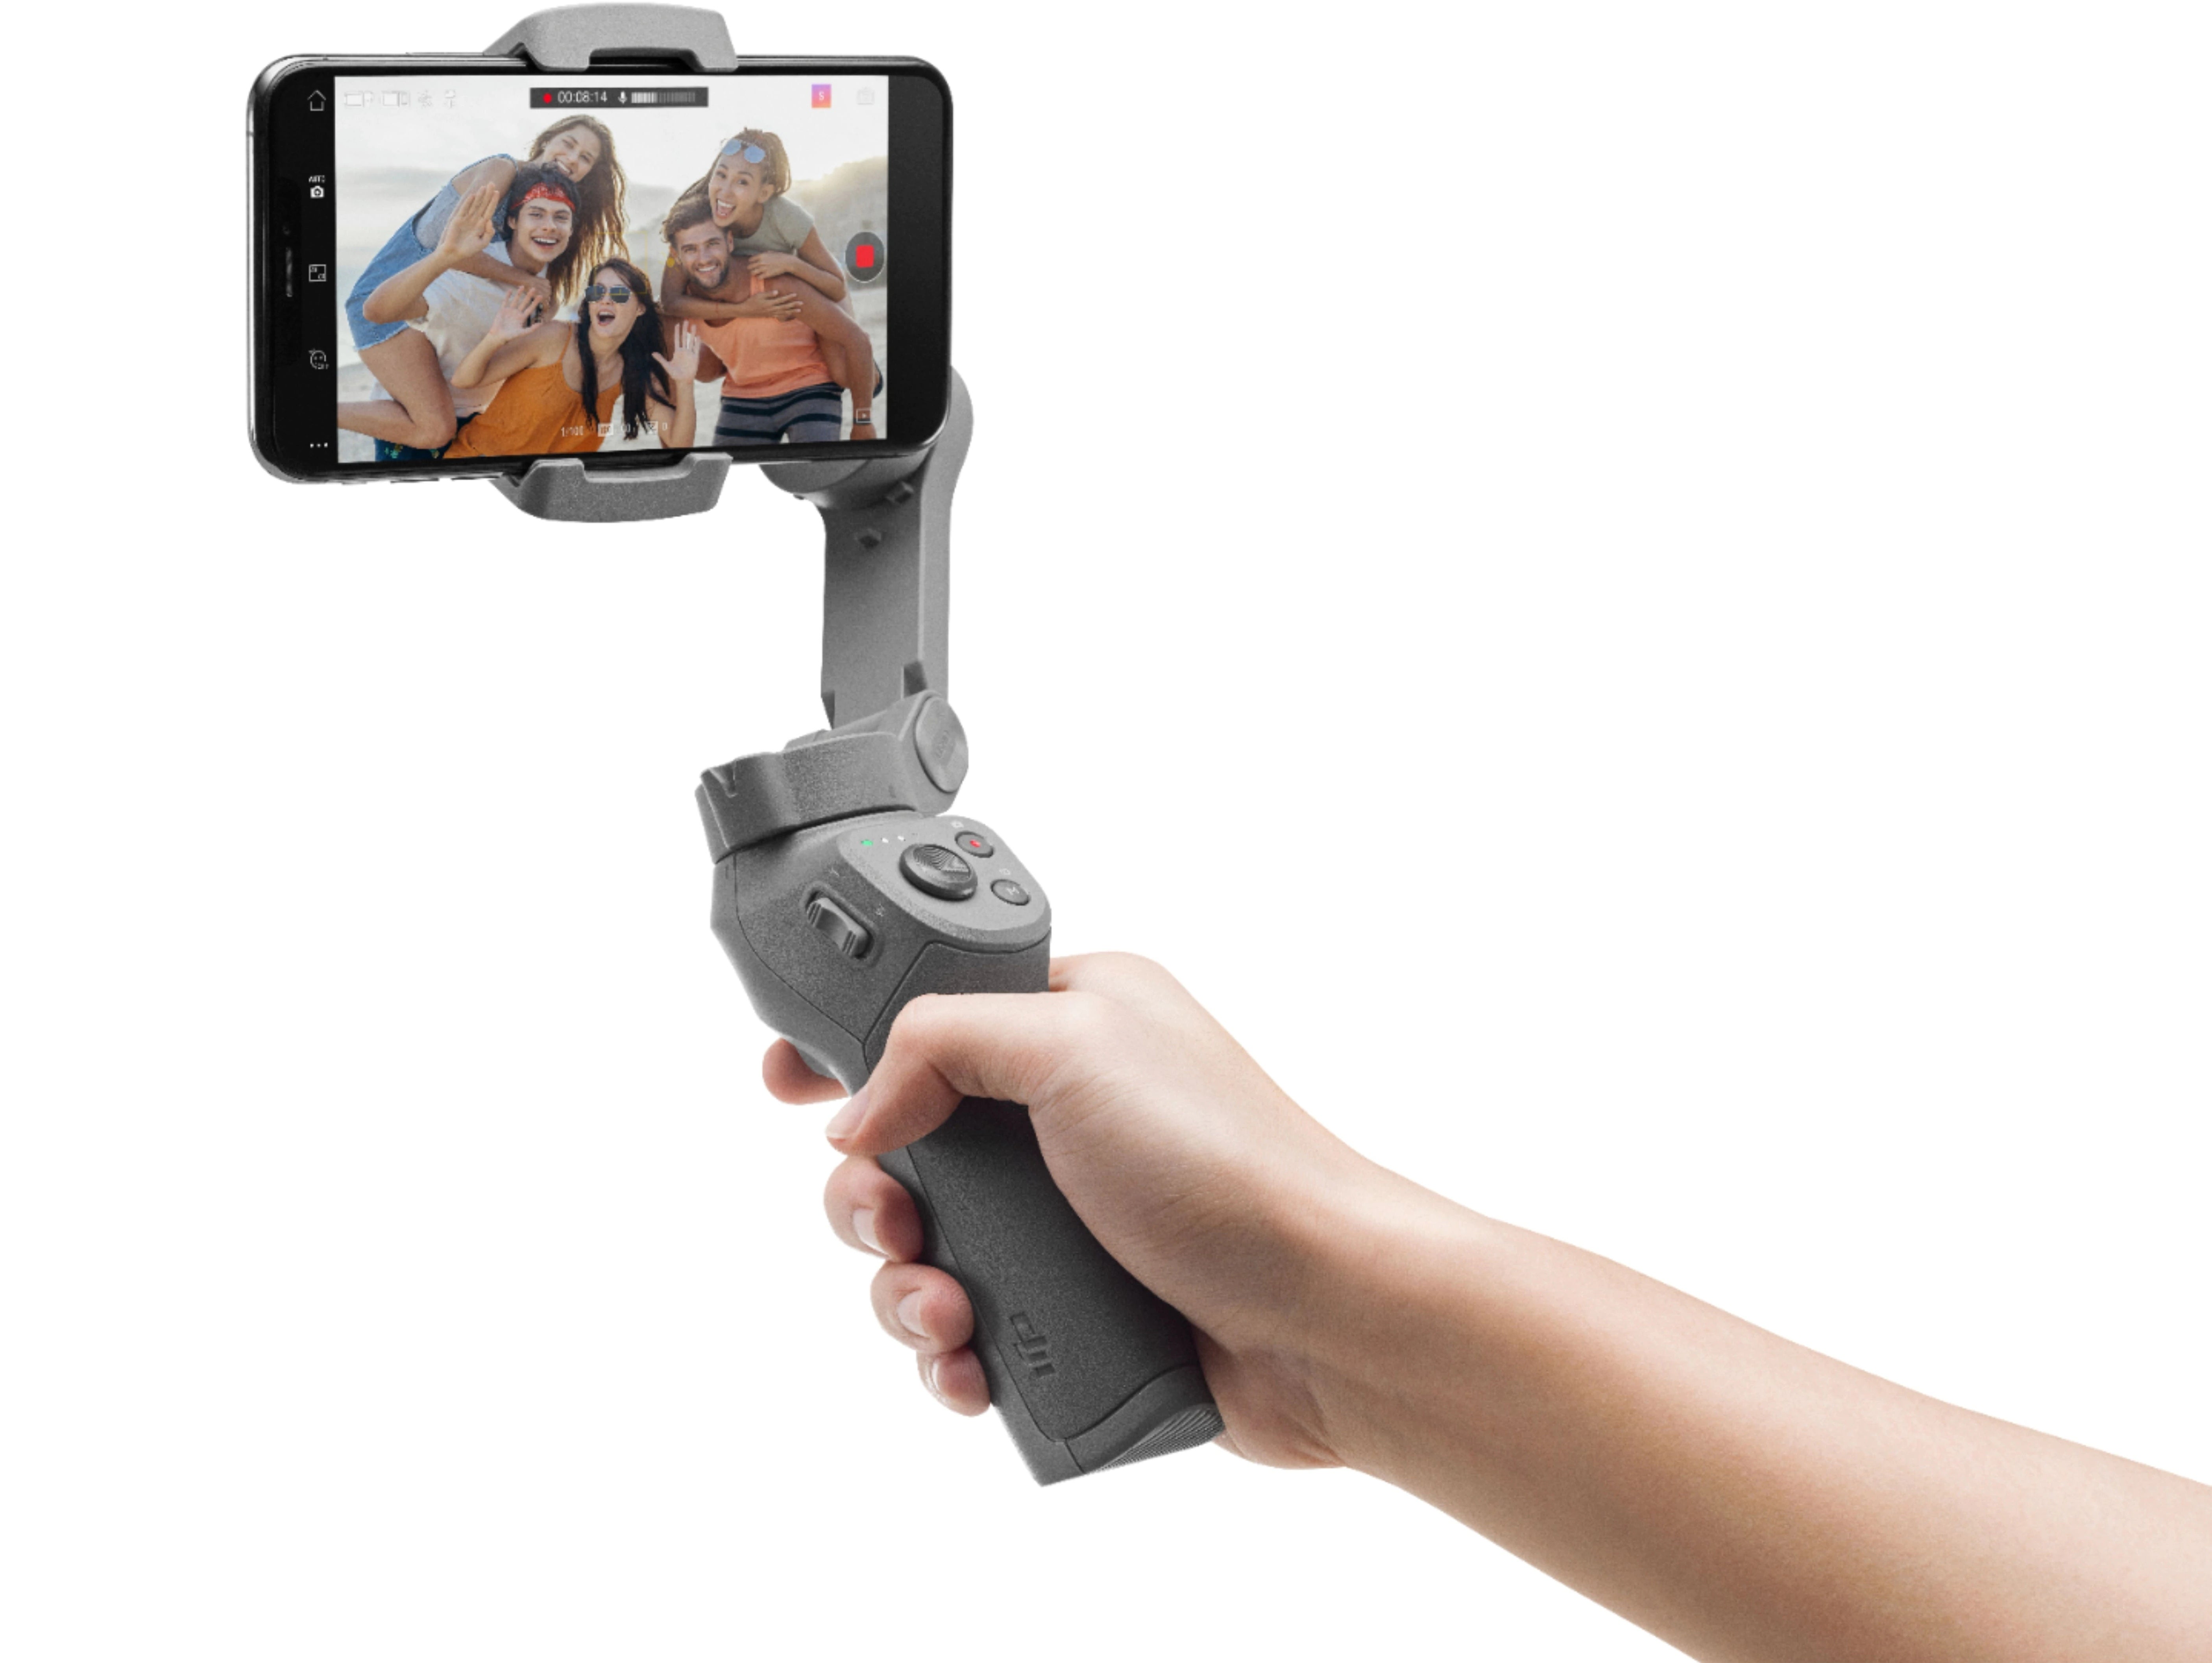 CameraTripod Stand with Universal Cell Phone Holder for Selfie or Vlogging Remote Shutter Included Endurax Flexible Tripod for iPhone iPad 